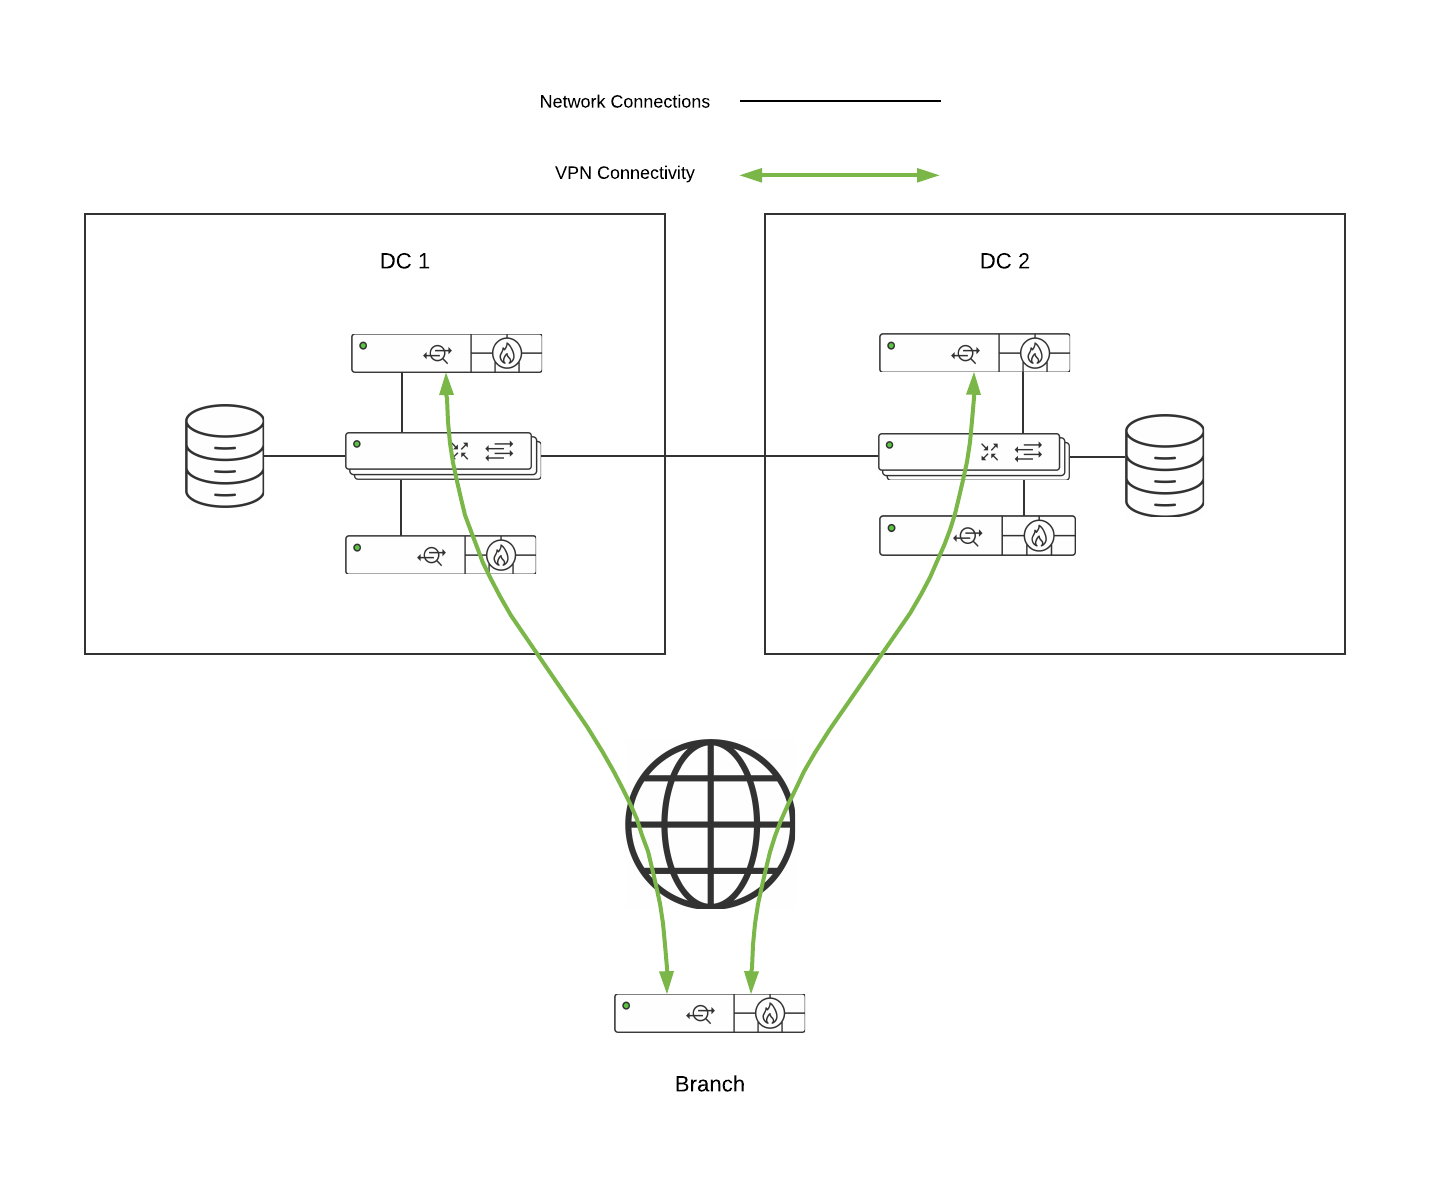 DC-DC Failover Auto VPN topology with branch connecting to two DCs.